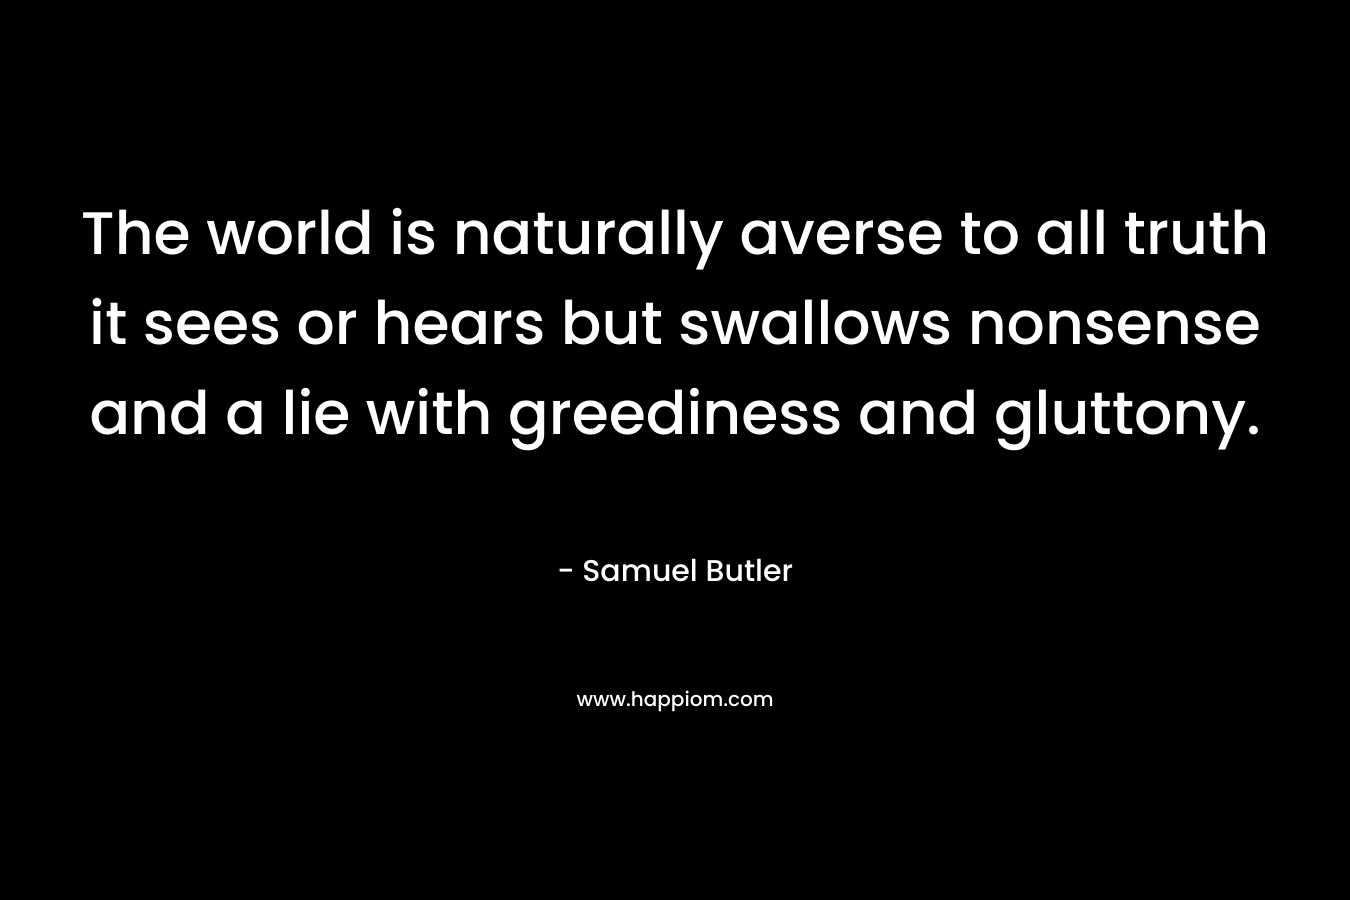 The world is naturally averse to all truth it sees or hears but swallows nonsense and a lie with greediness and gluttony.